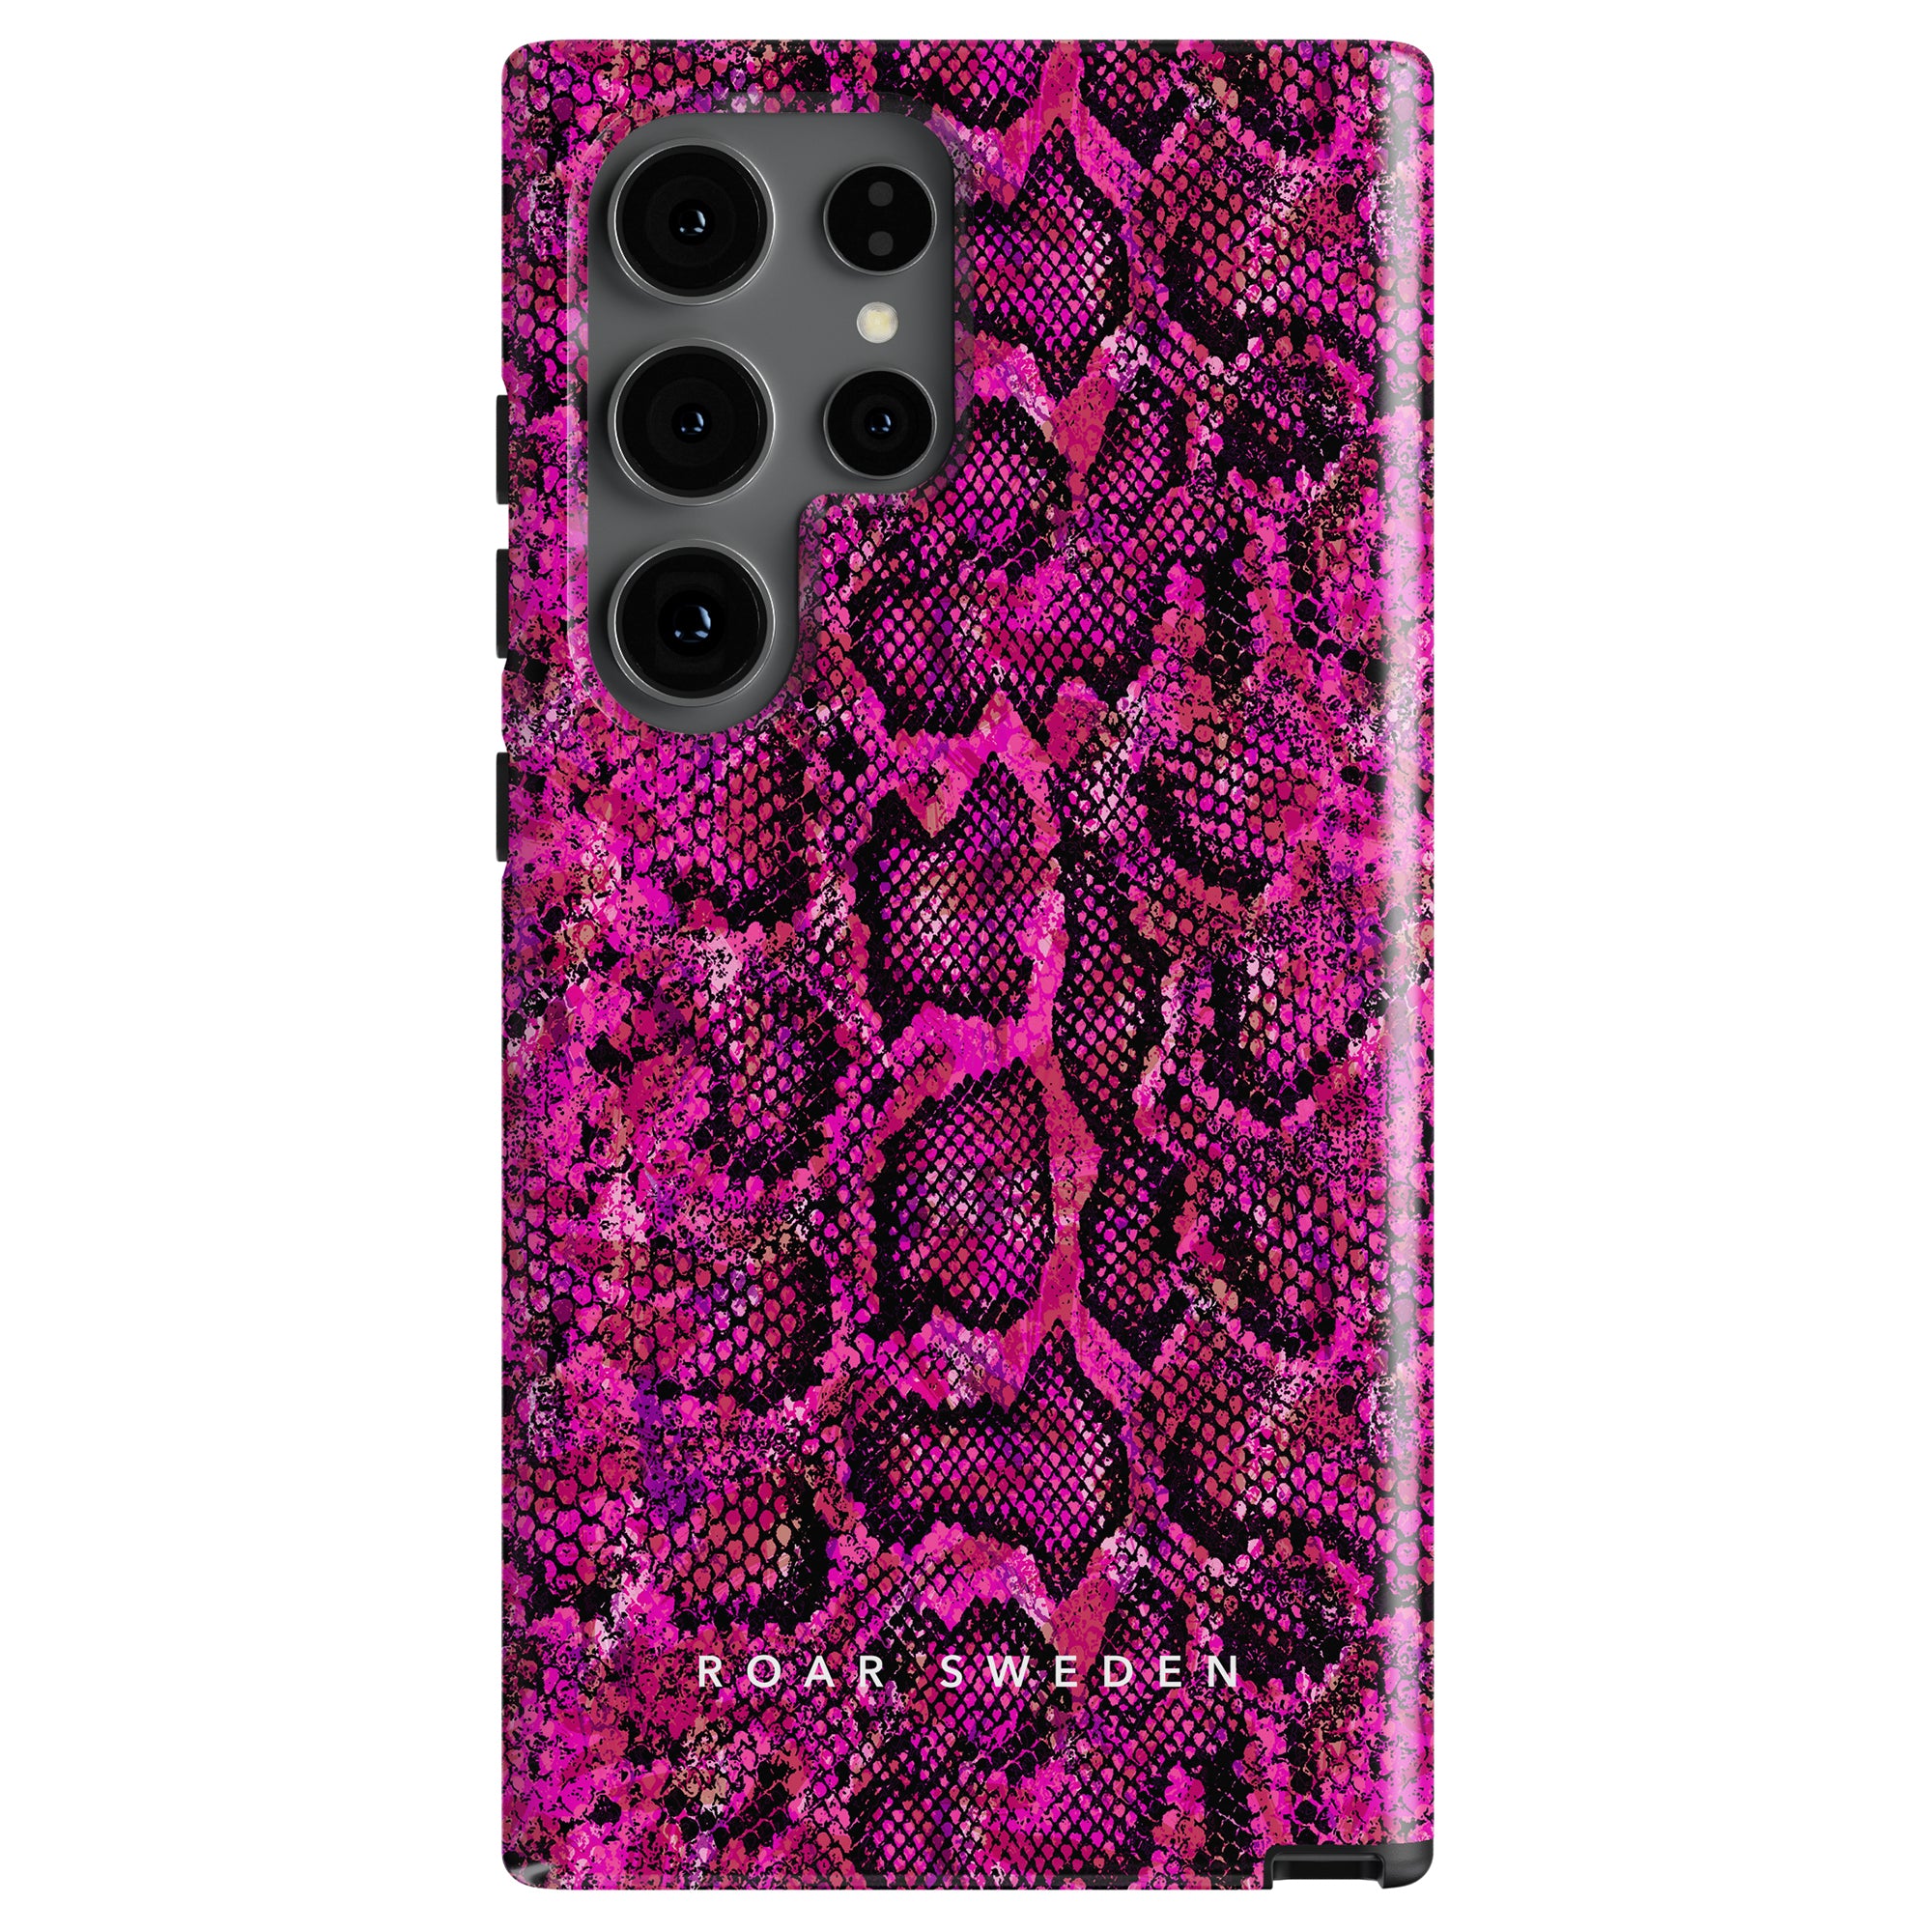 A smartphone with a pink snakeskin-patterned case, featuring five camera lenses. This Pink Snake - Tough case displays the text "Roar Sweden" at the bottom and offers pålitligt skydd for your device.